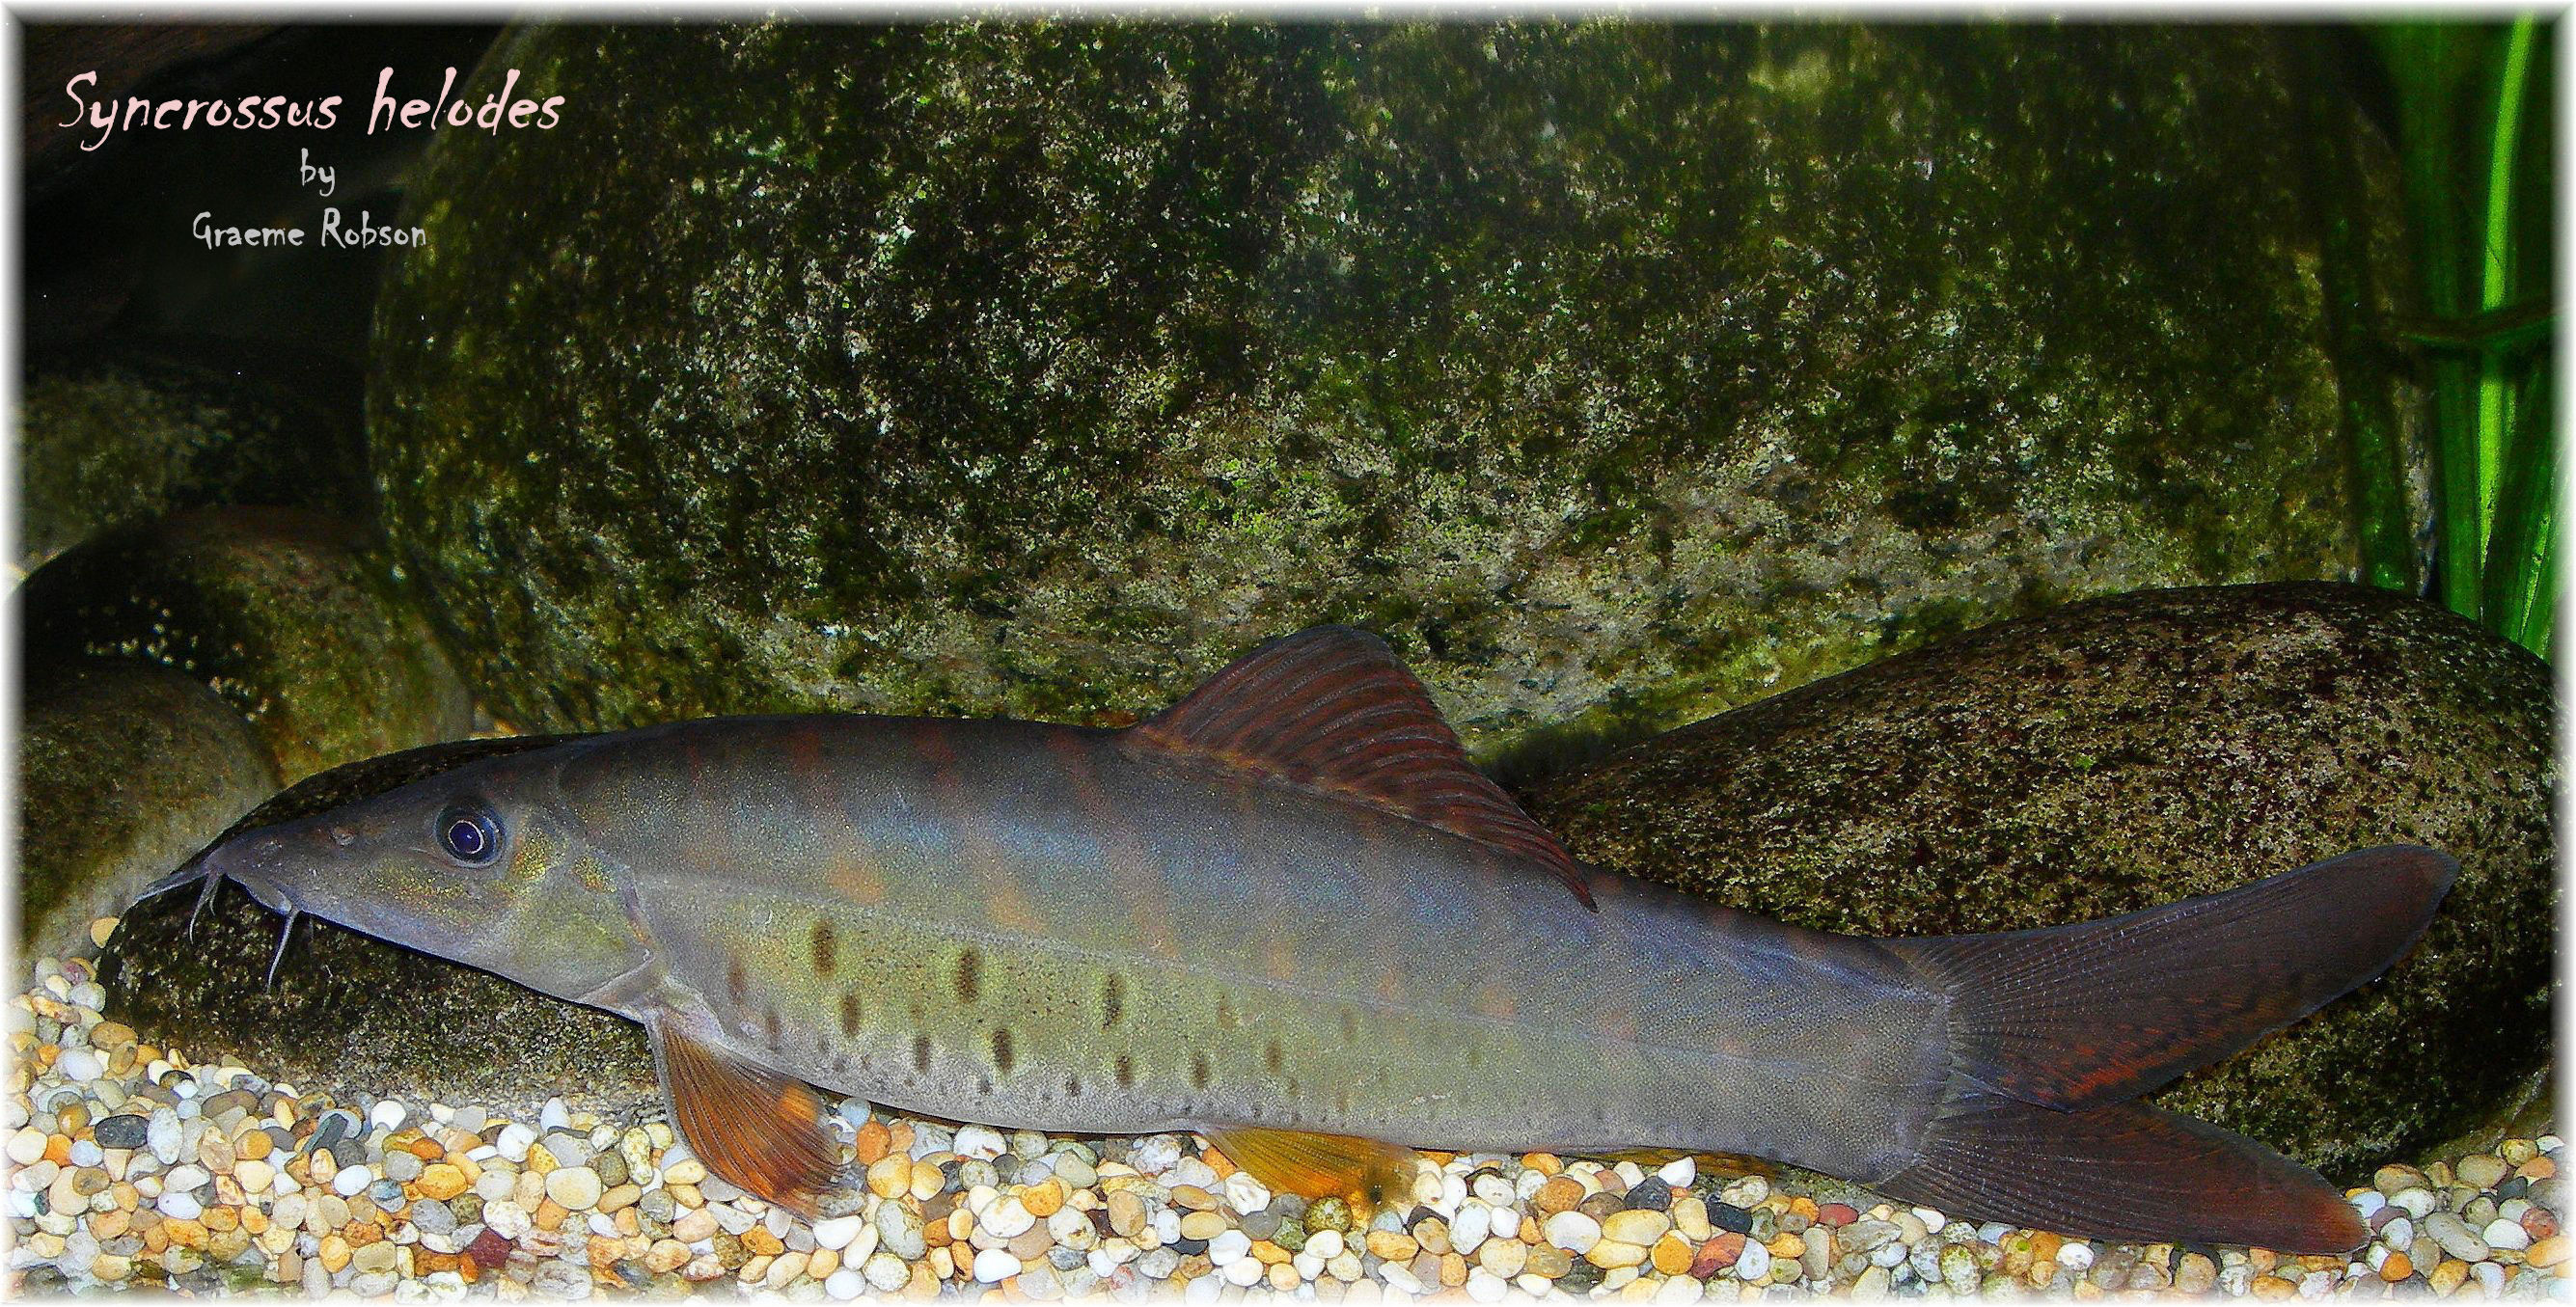 Syncrossus helodes